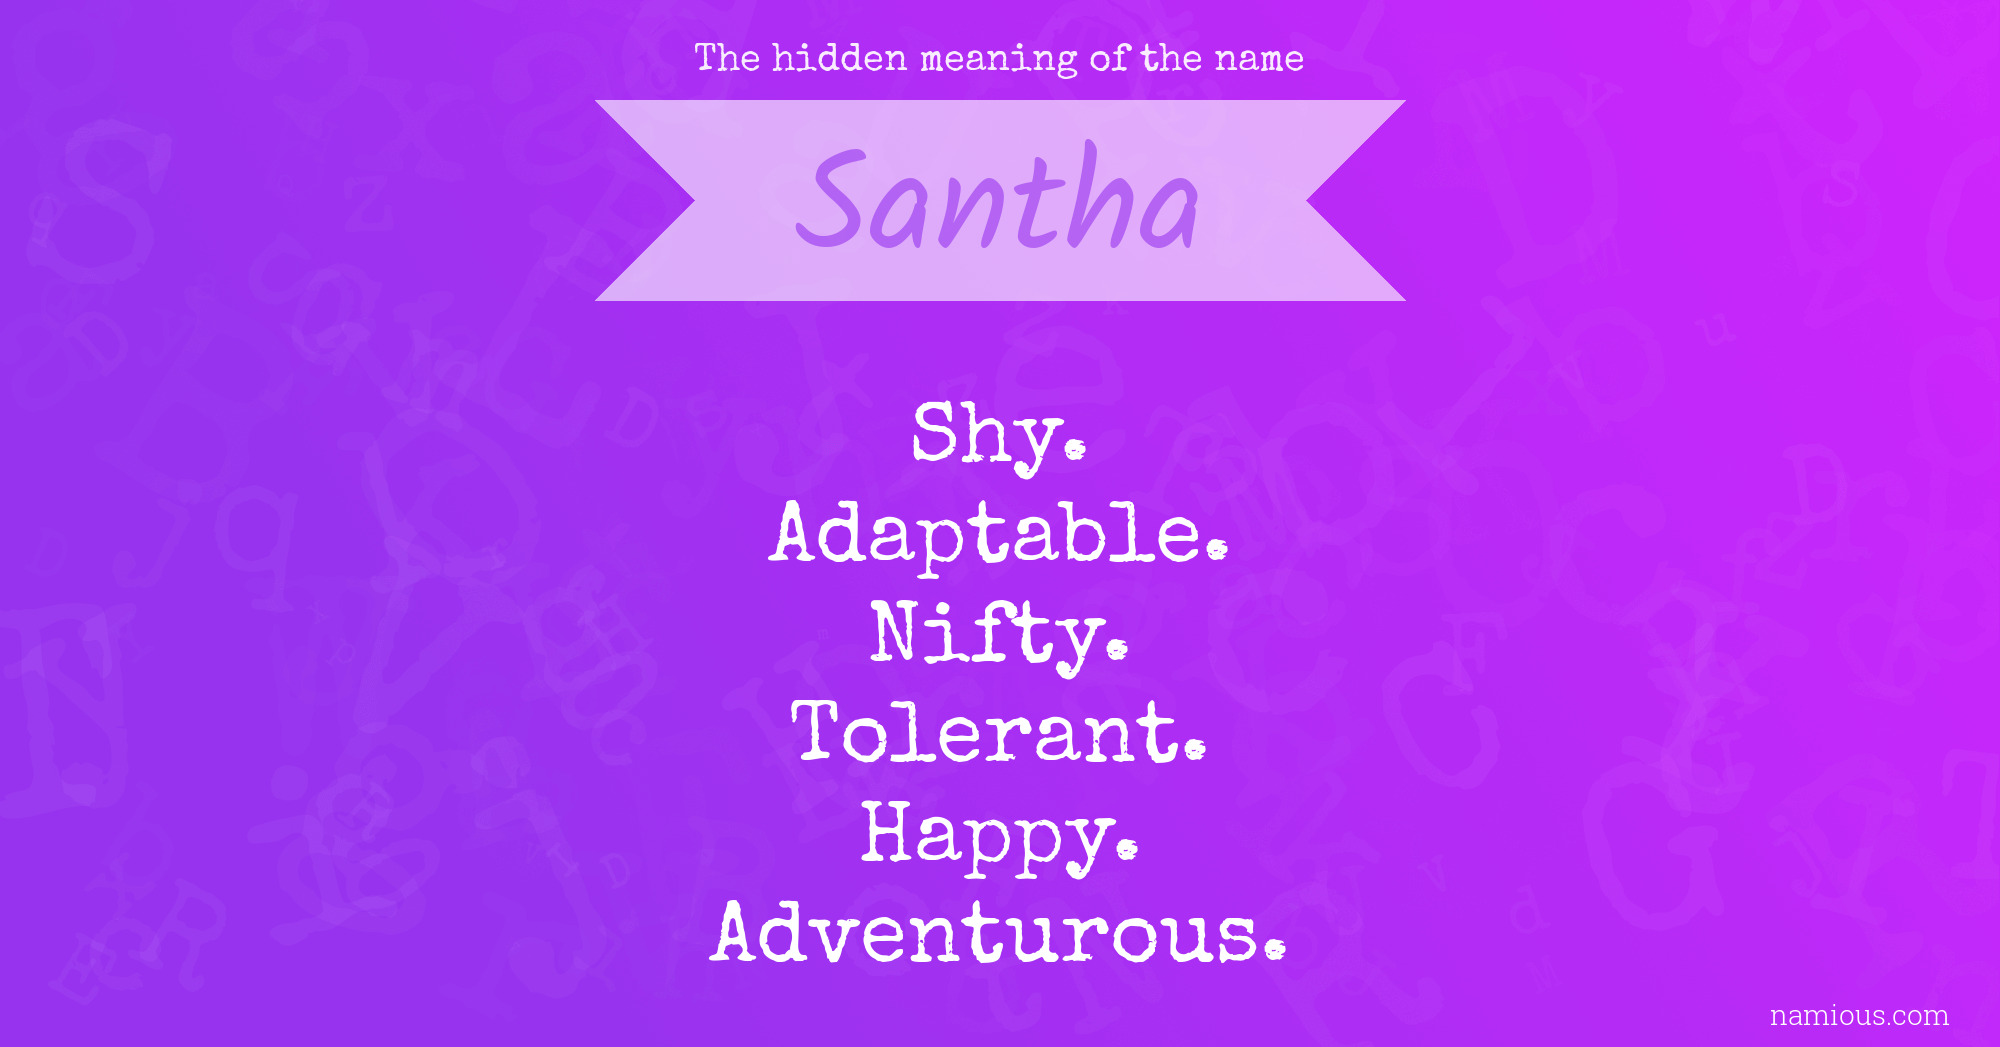 The hidden meaning of the name Santha